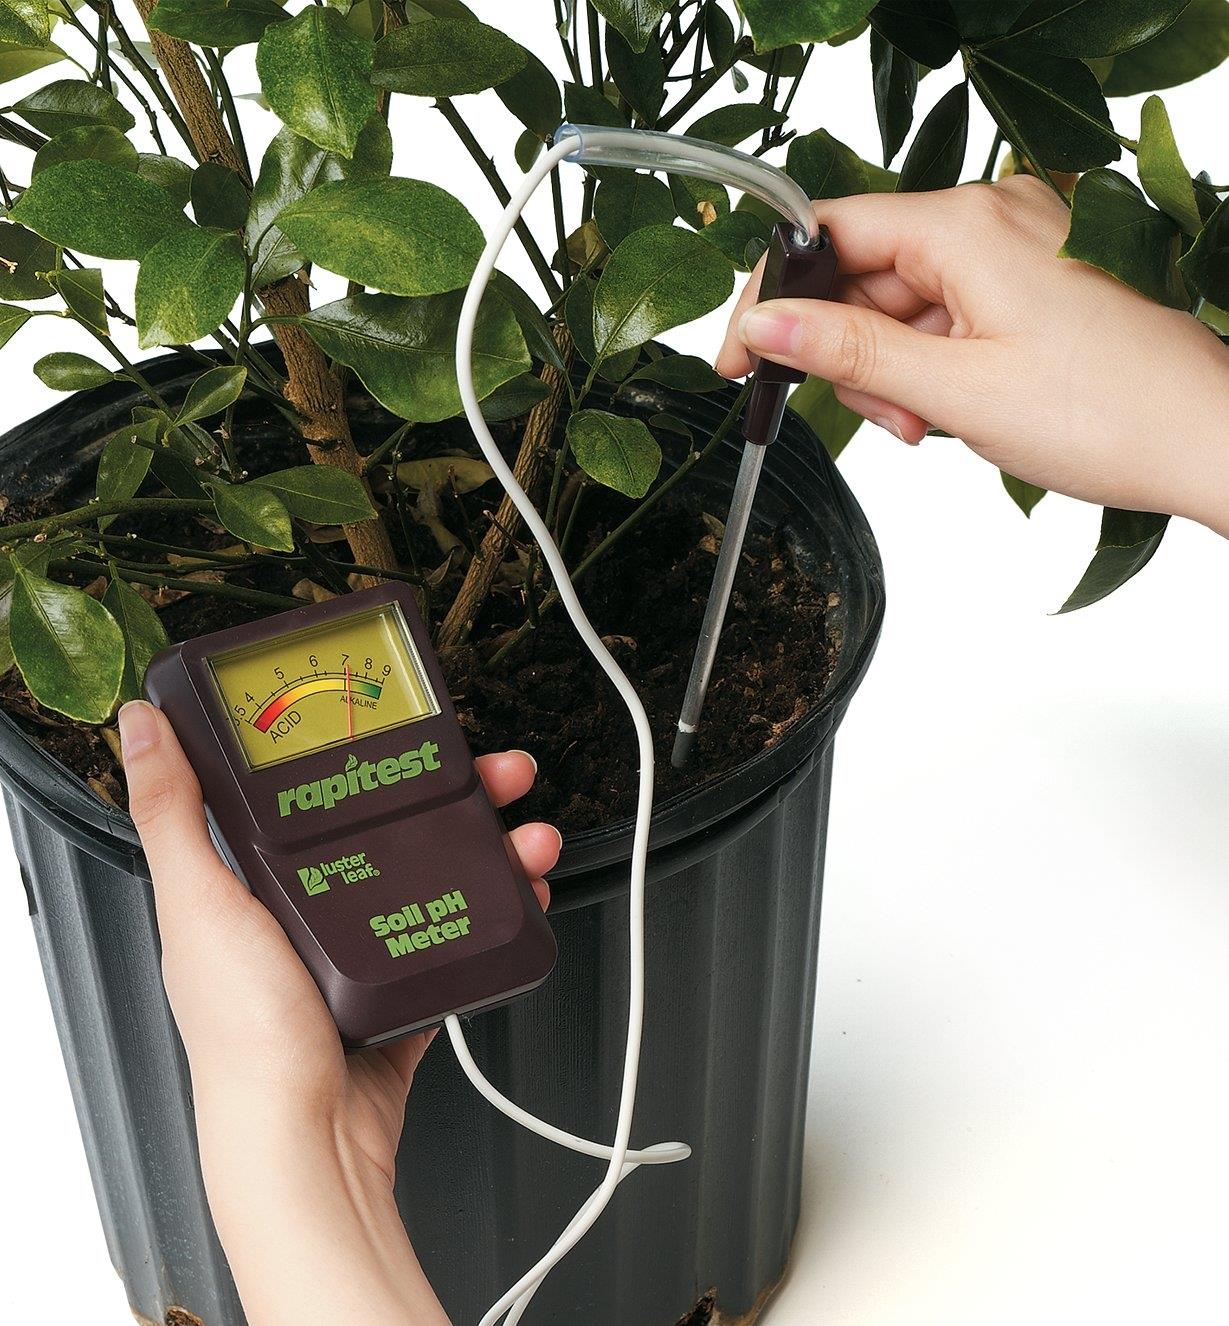 Inserting the probe of the Soil pH Meter into the soil of a potted plant